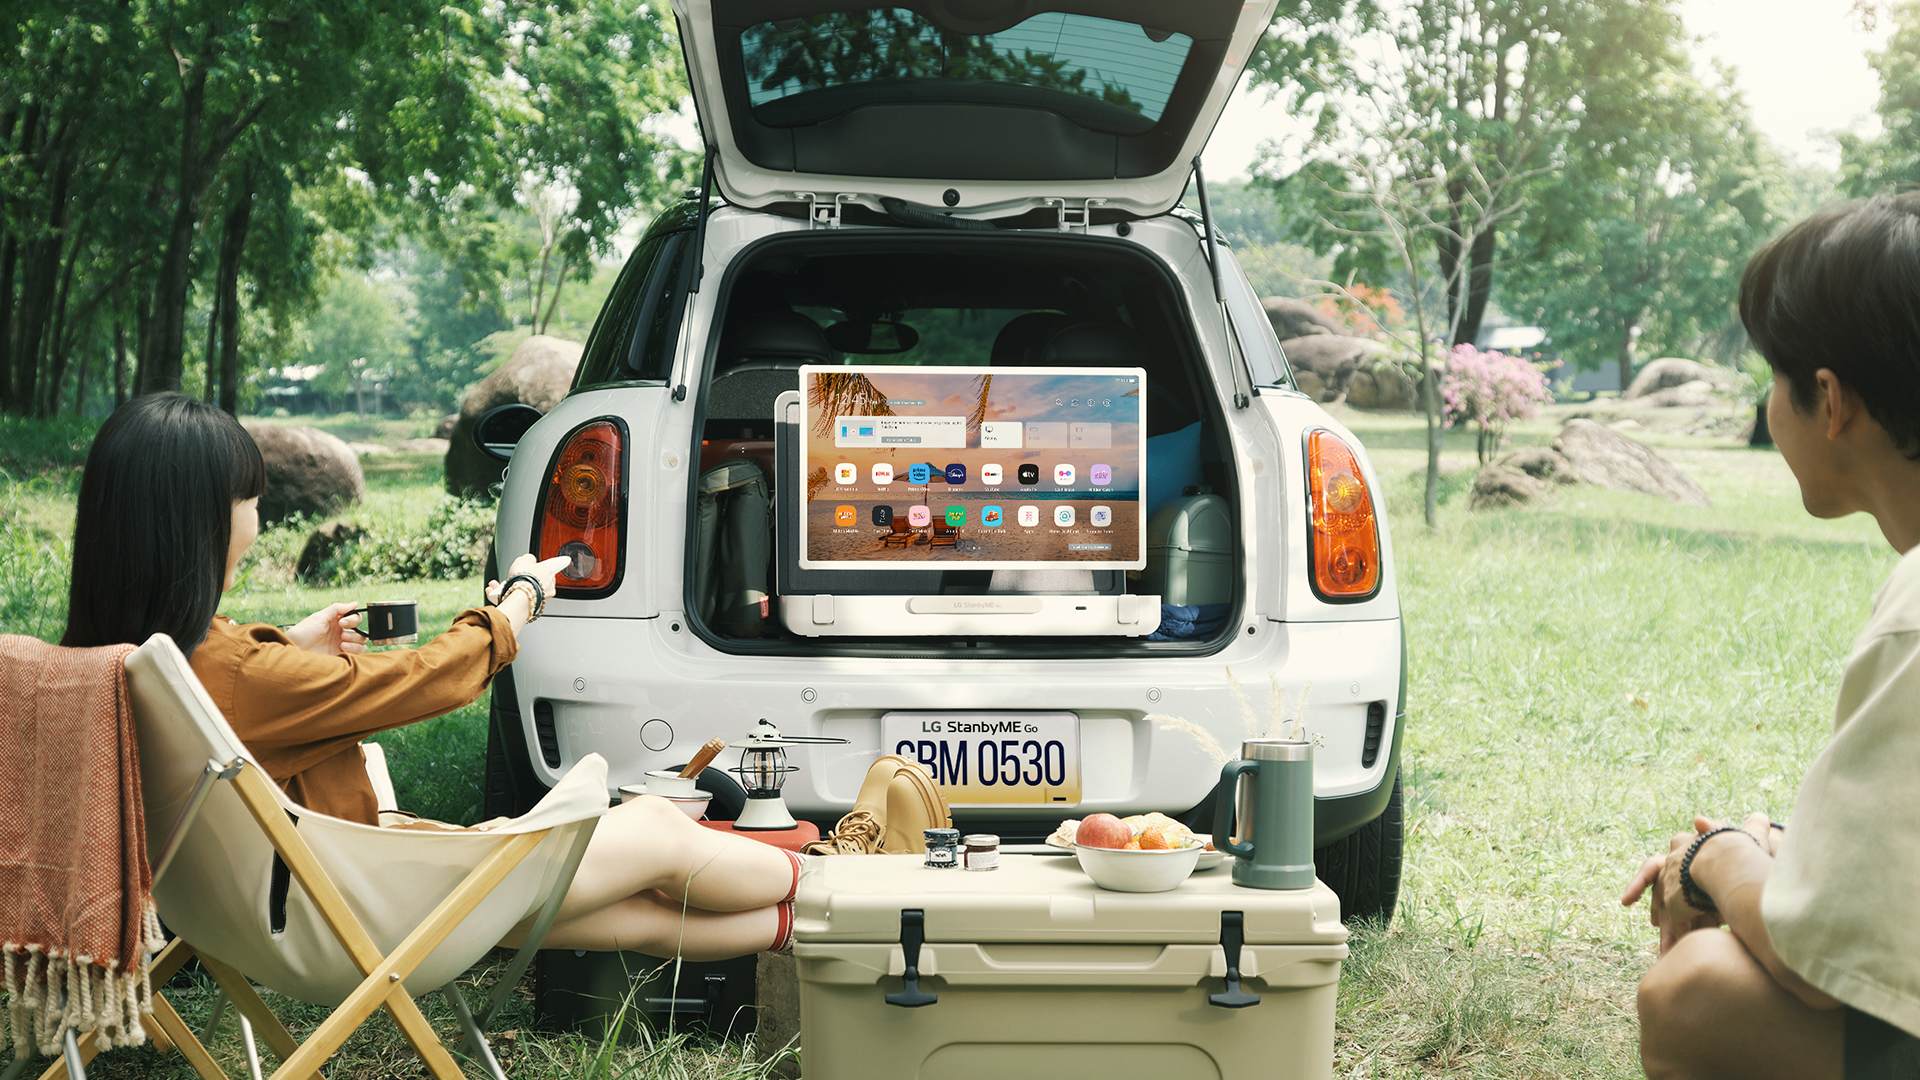 A young couple on a camping trip using LG StanbyME Go which is placed in the open trunk of their car